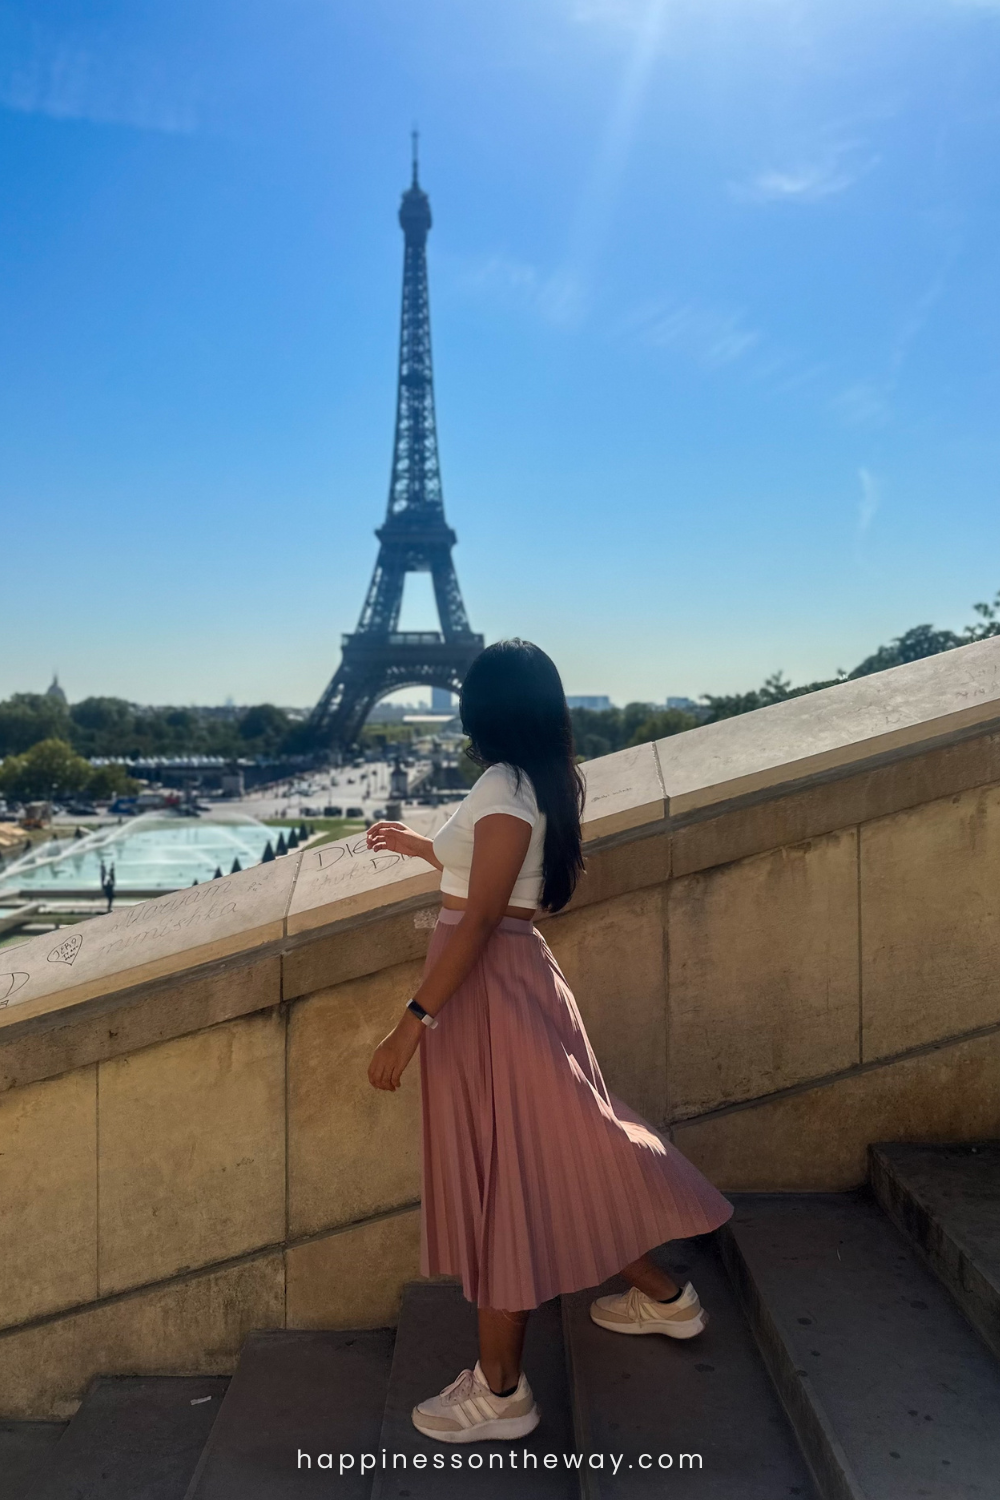 Me in in a pink pleated skirt and white top gazing at the Eiffel Tower, walking on steps on a sunny day. A questioning concept emerges, 'Is Paris overrated?'